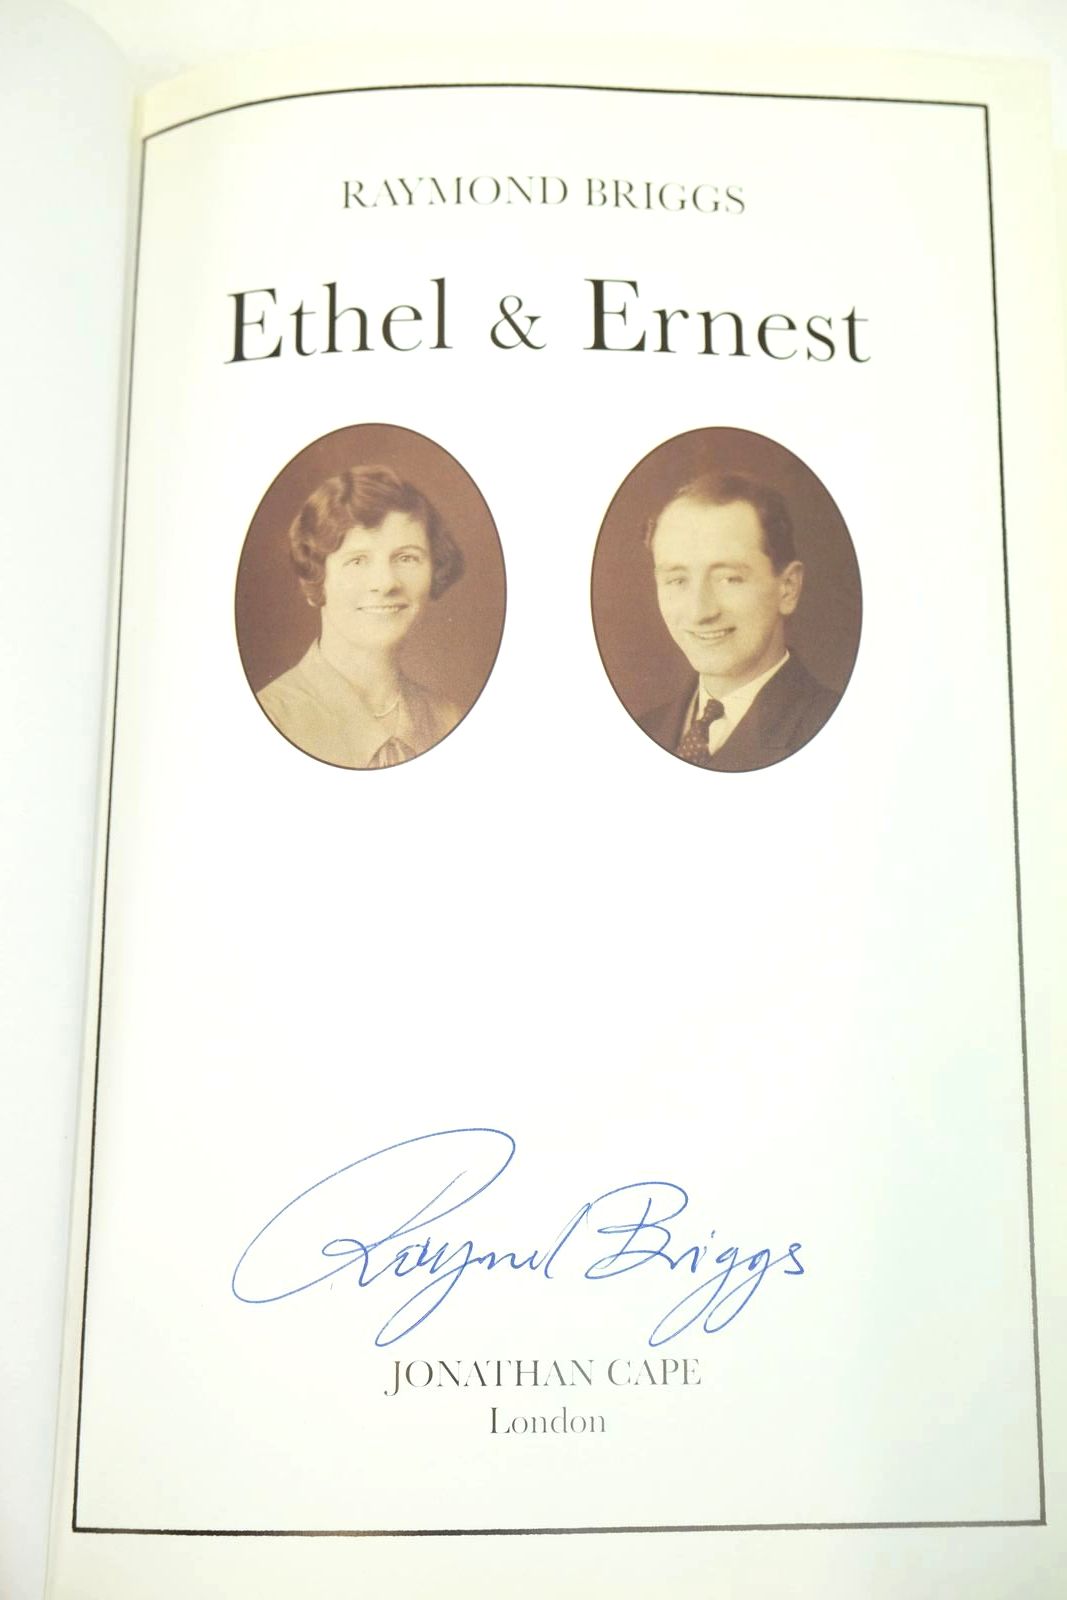 Photo of ETHEL & ERNEST written by Briggs, Raymond illustrated by Briggs, Raymond published by Jonathan Cape (STOCK CODE: 1323012)  for sale by Stella & Rose's Books